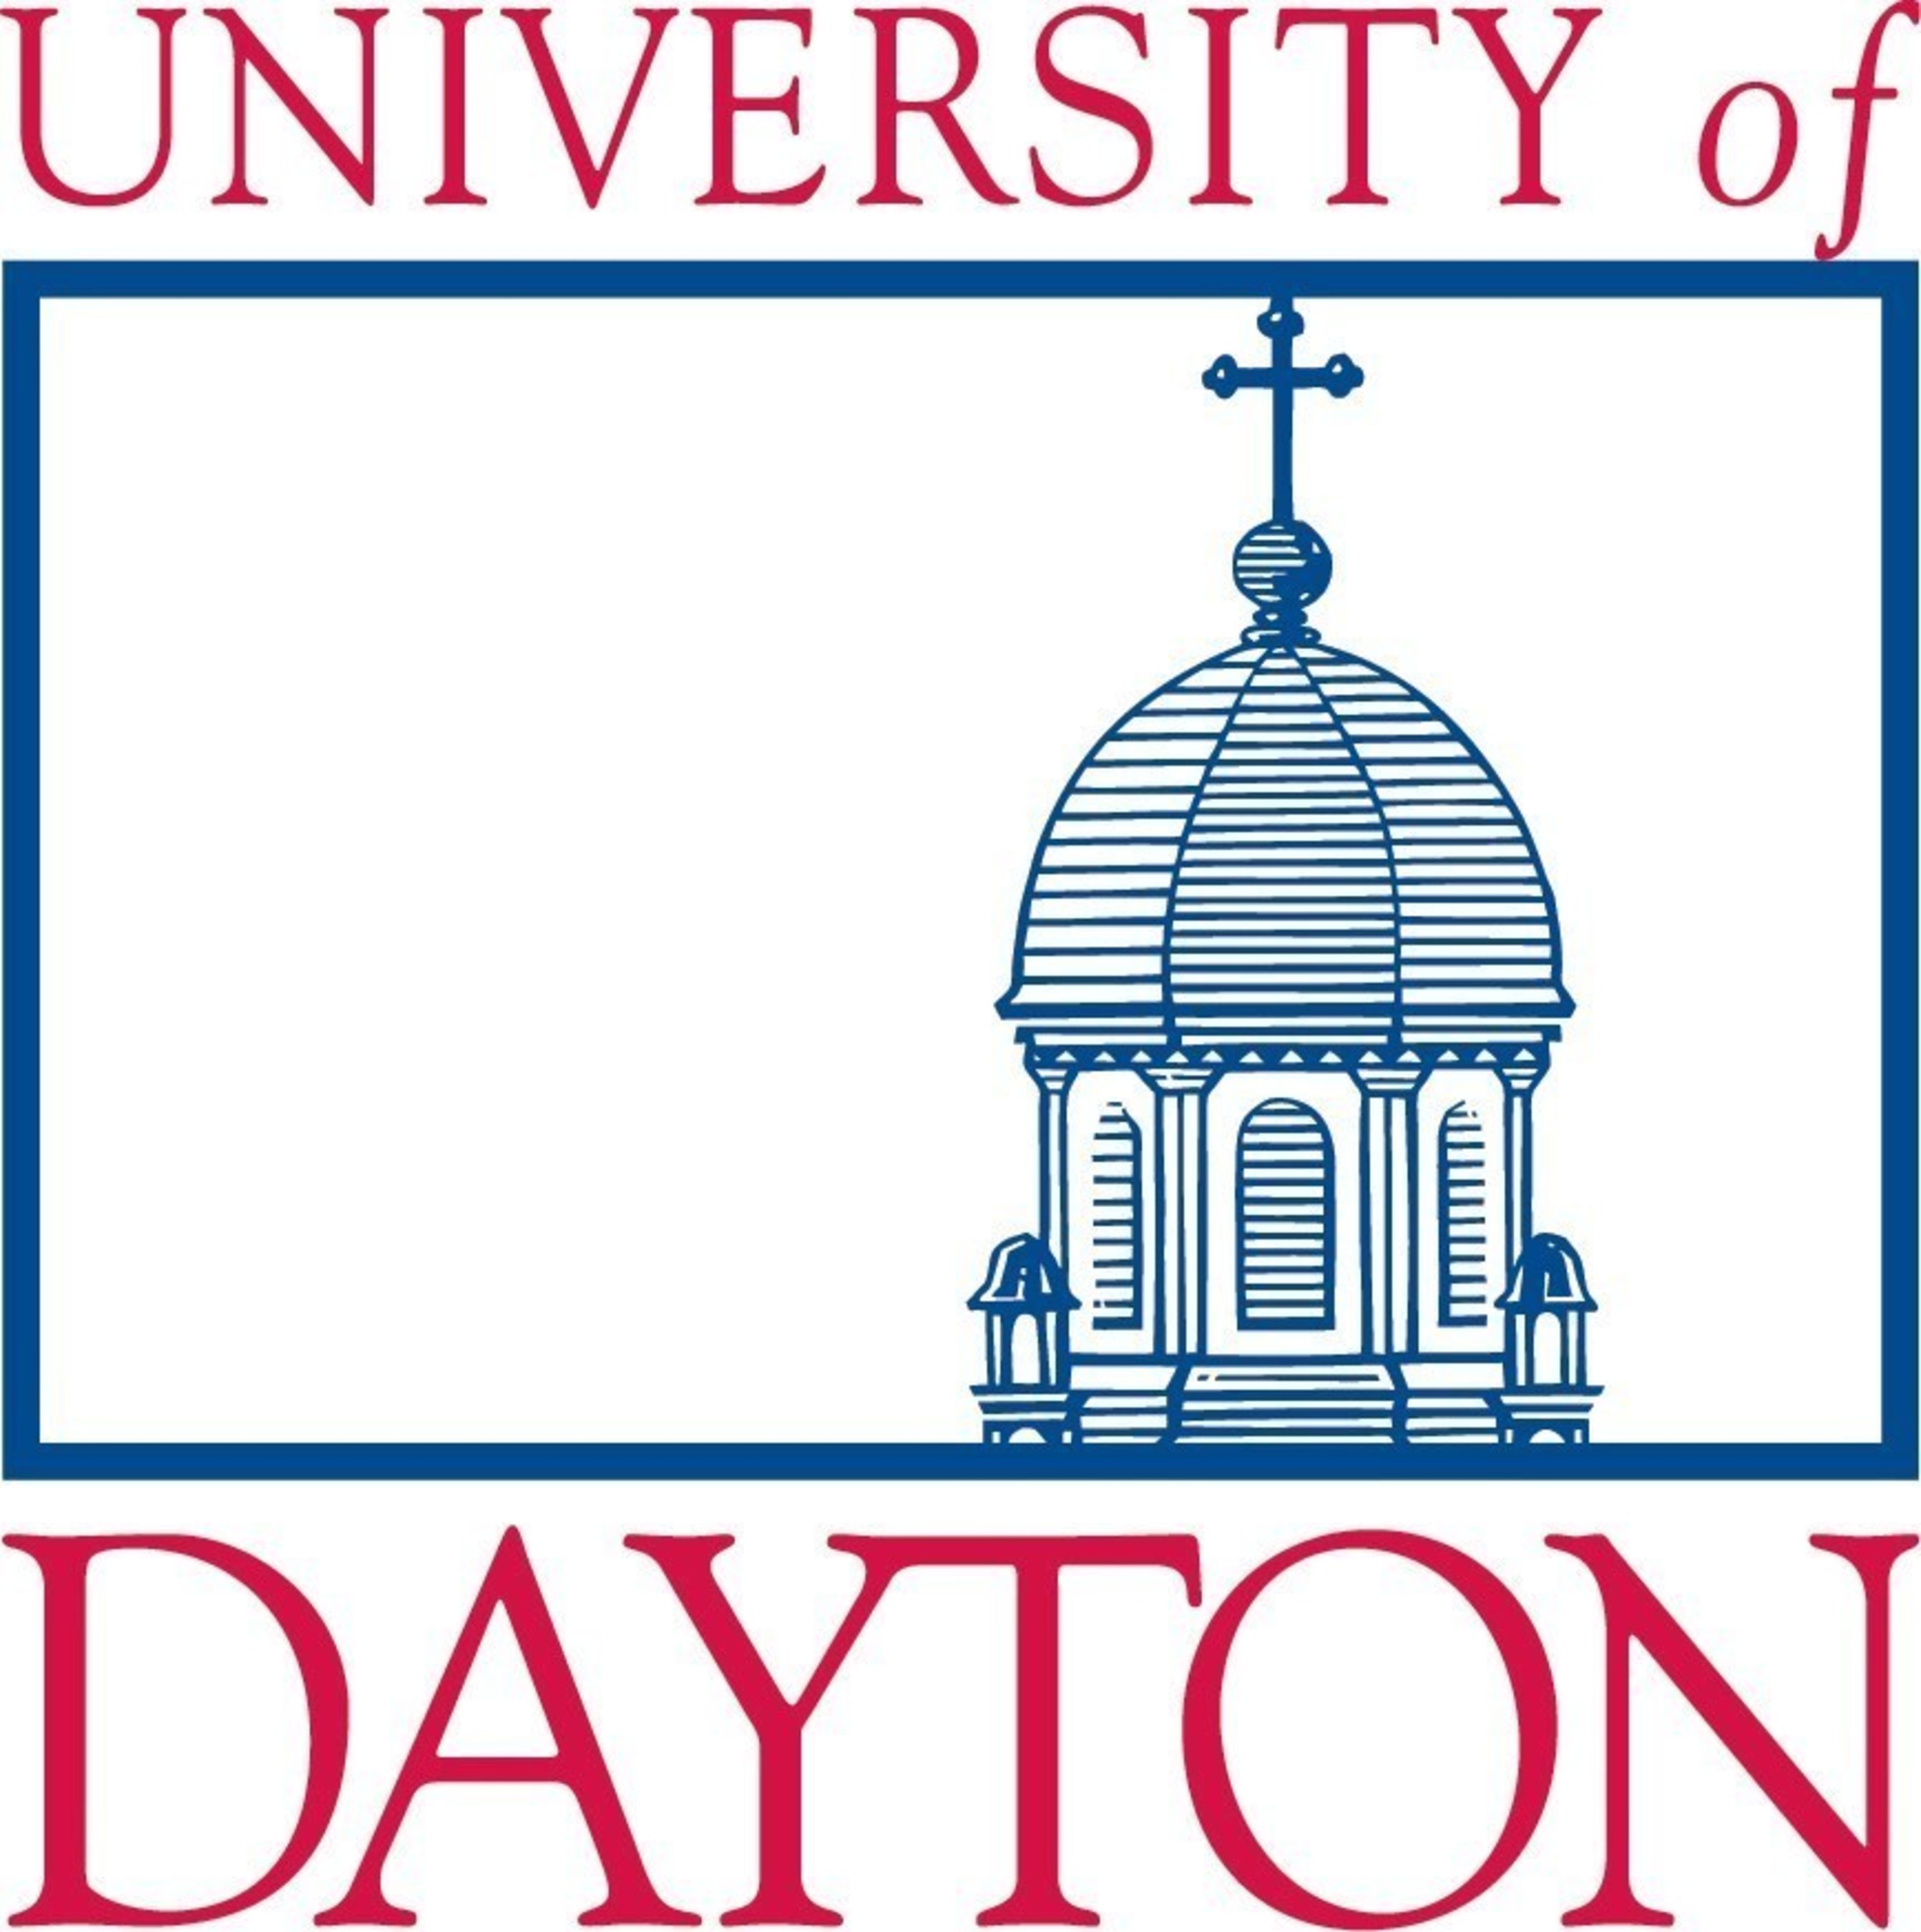 The University of Dayton is a leader in fossil fuel divestment.